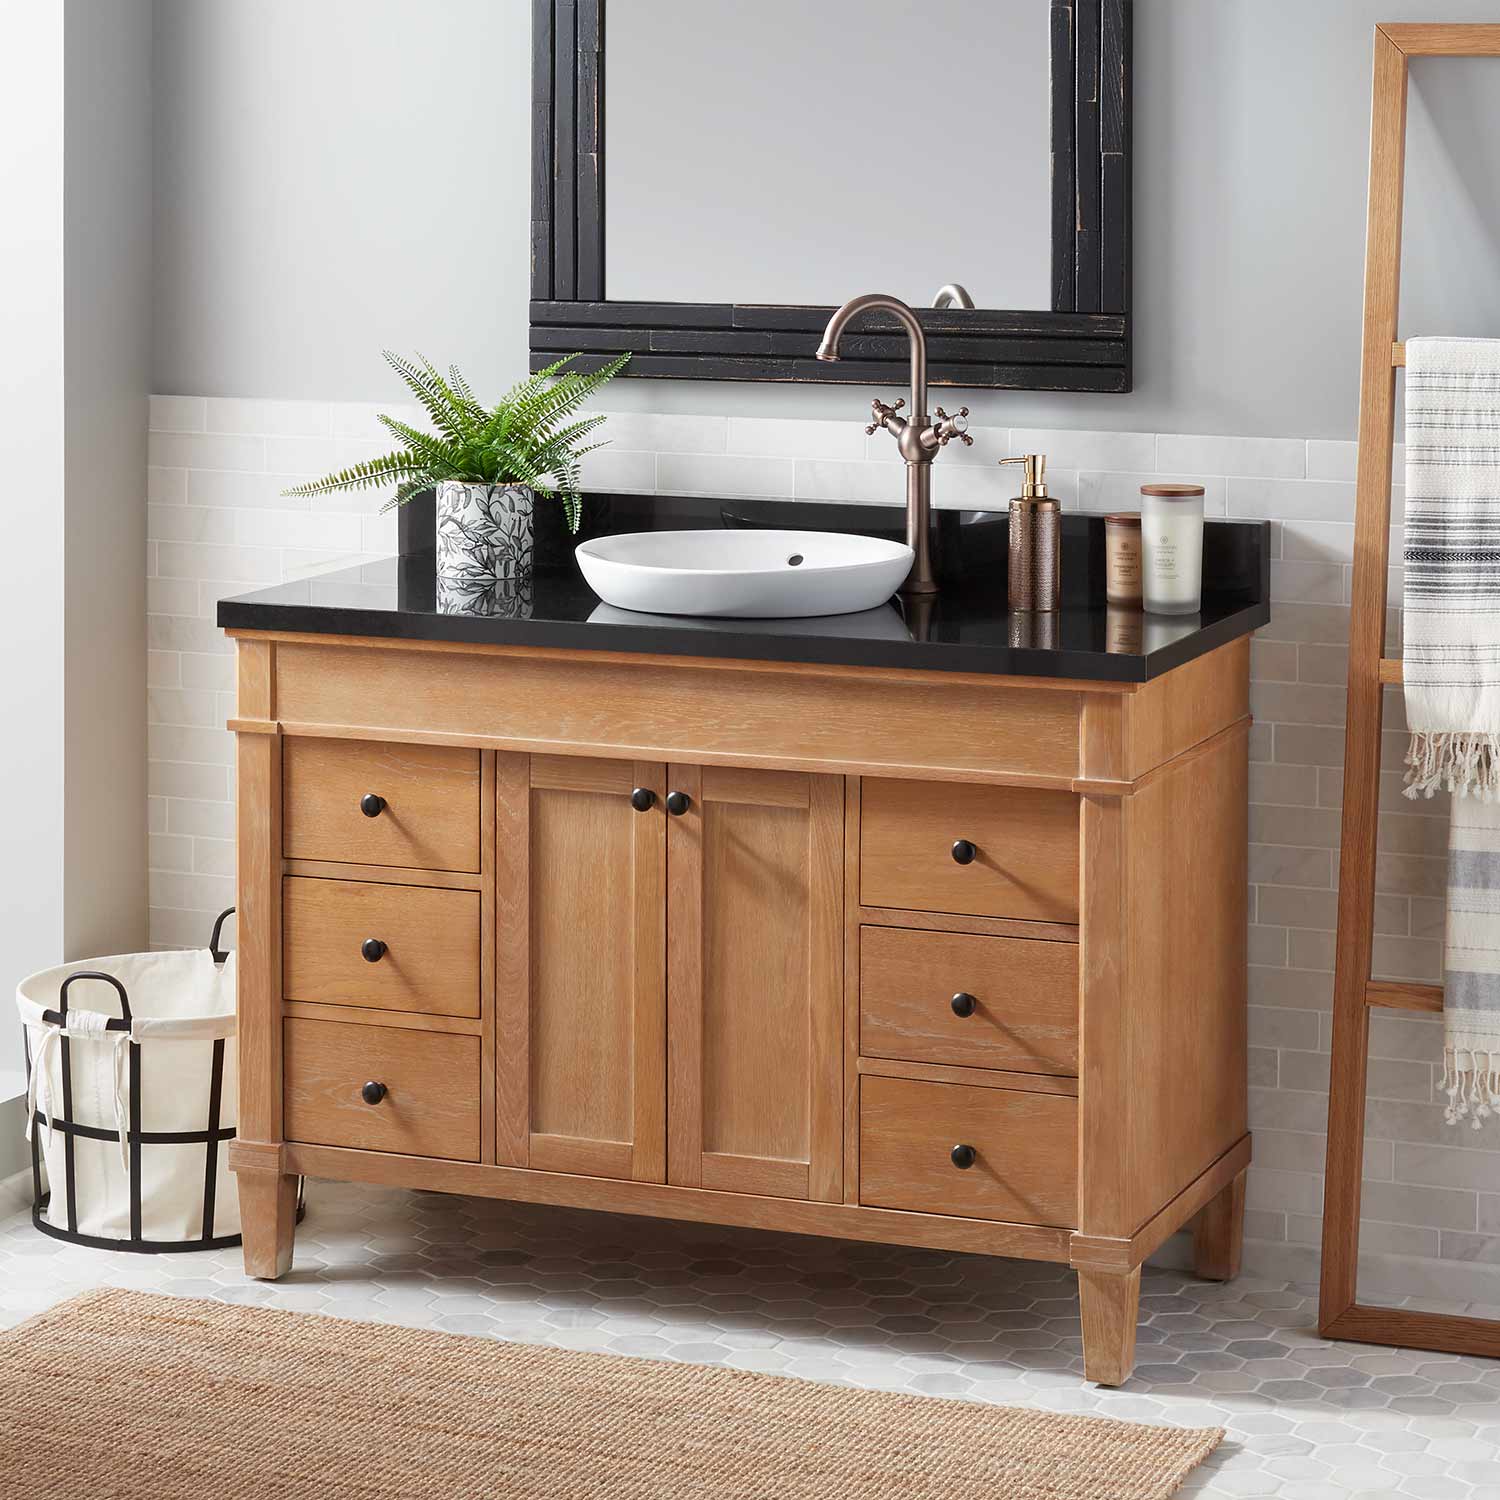 Vanity Set With Solid Oak Wood Cabinet, Vanity Top With Sink On Right